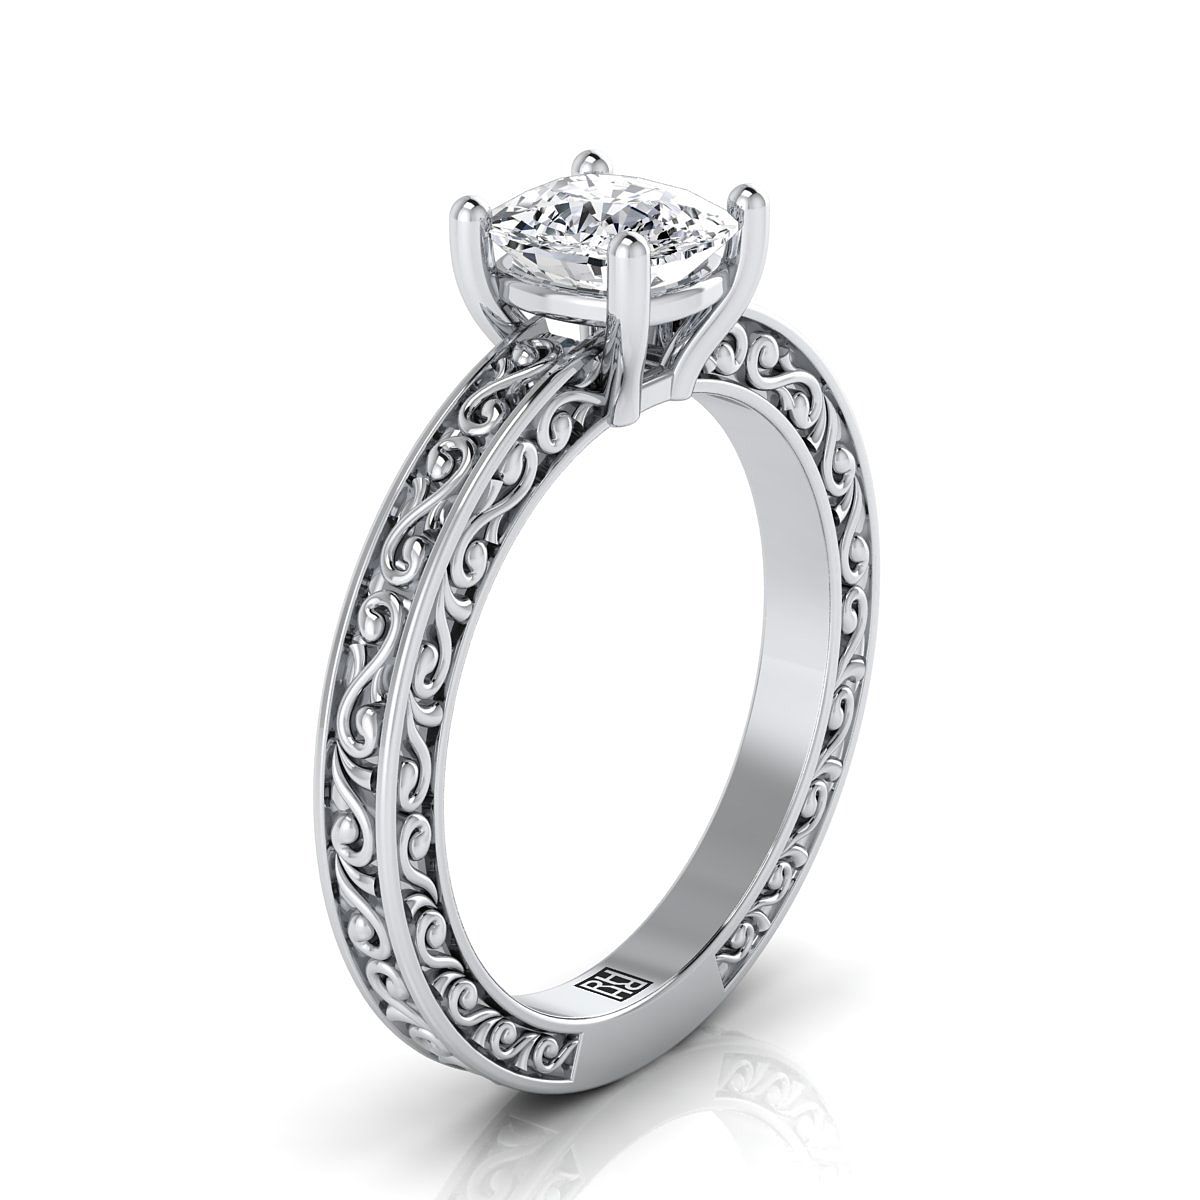 18K White Gold Cushion Hand Engraved Scroll Vintage Solitaire Engagement Ring